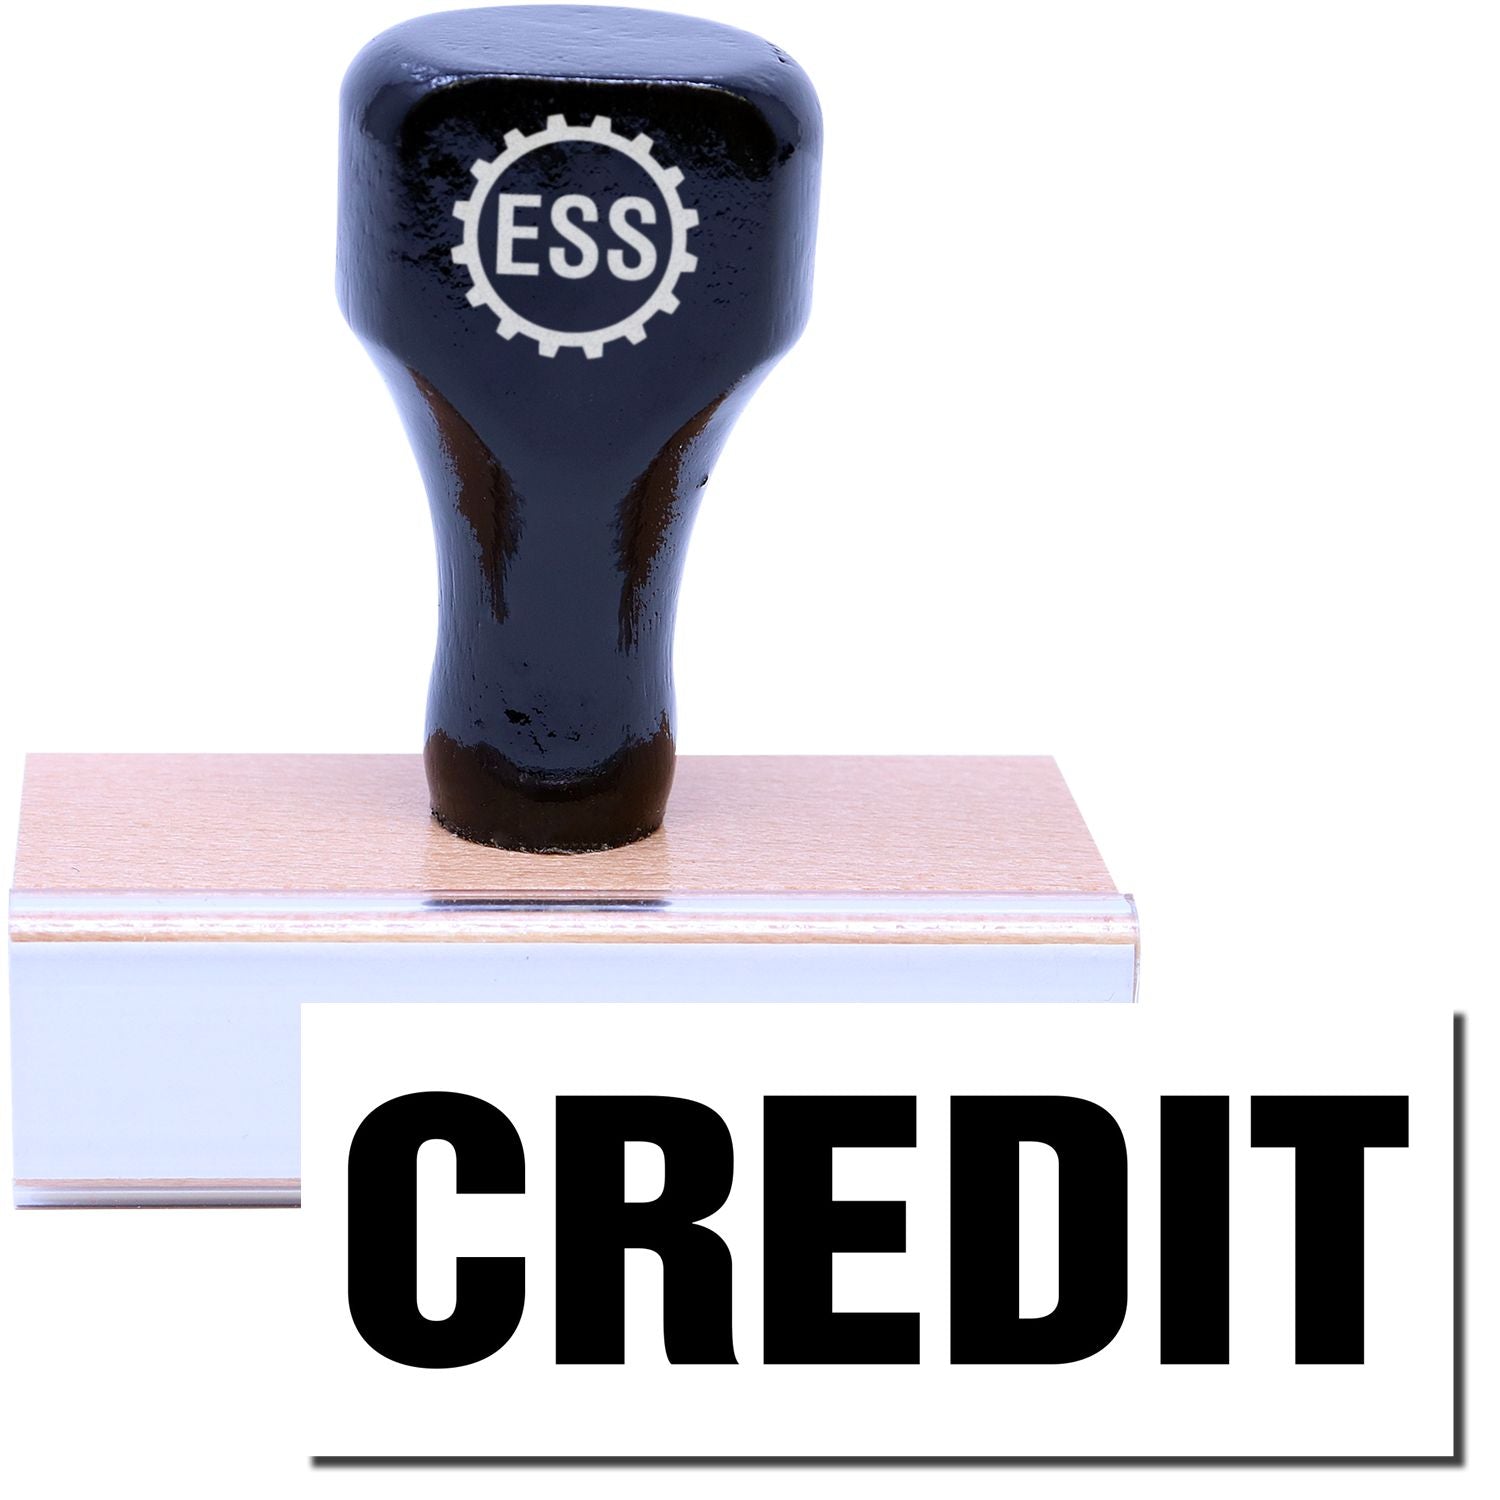 A stock office rubber stamp with a stamped image showing how the text "CREDIT" in bold font is displayed after stamping.